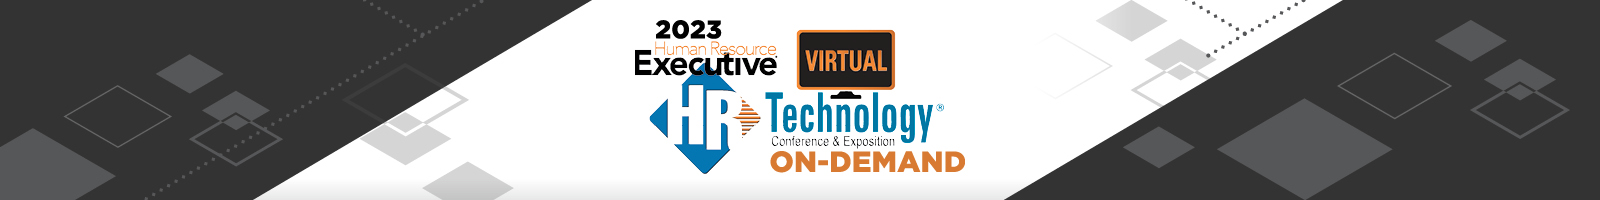 HR Tech Virtual February 28 - March 2, 2023 | A FREE Interactive Online Event